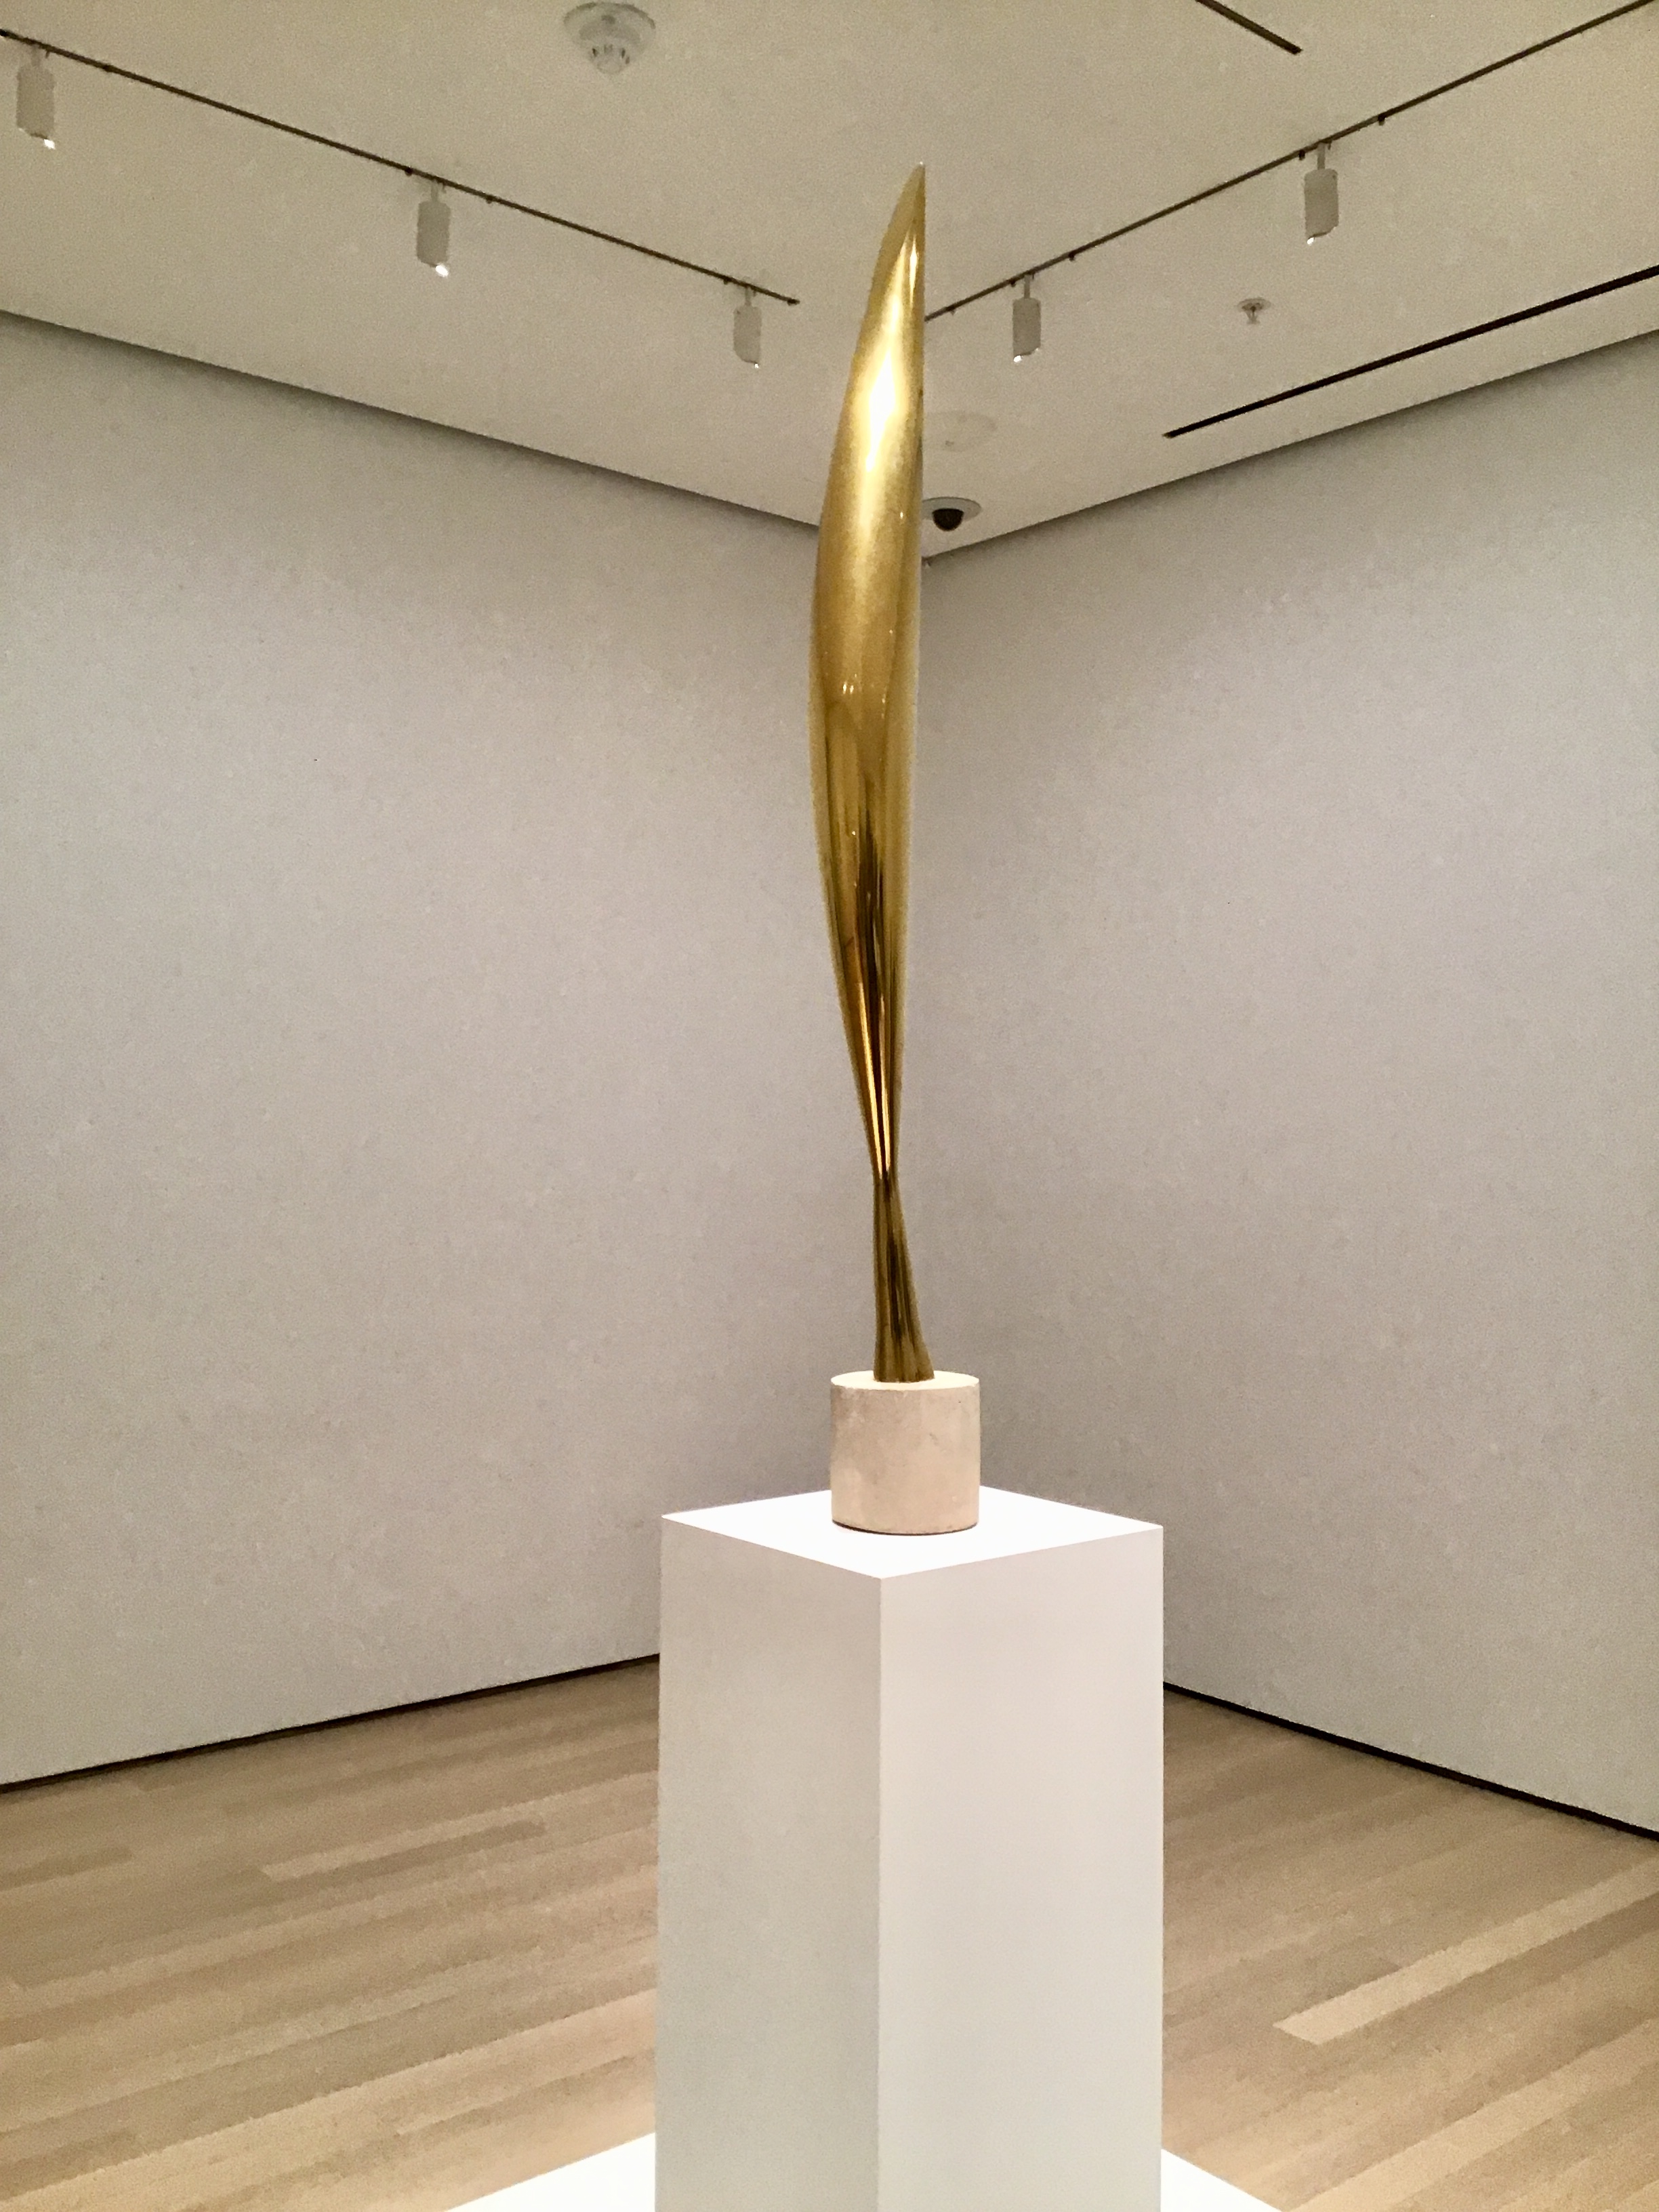 Constantin Brancusi’s Sculpture Exhibition at the Museum of Modern Art in New York City (Photo: Ceara Rossetti/Gildshire)